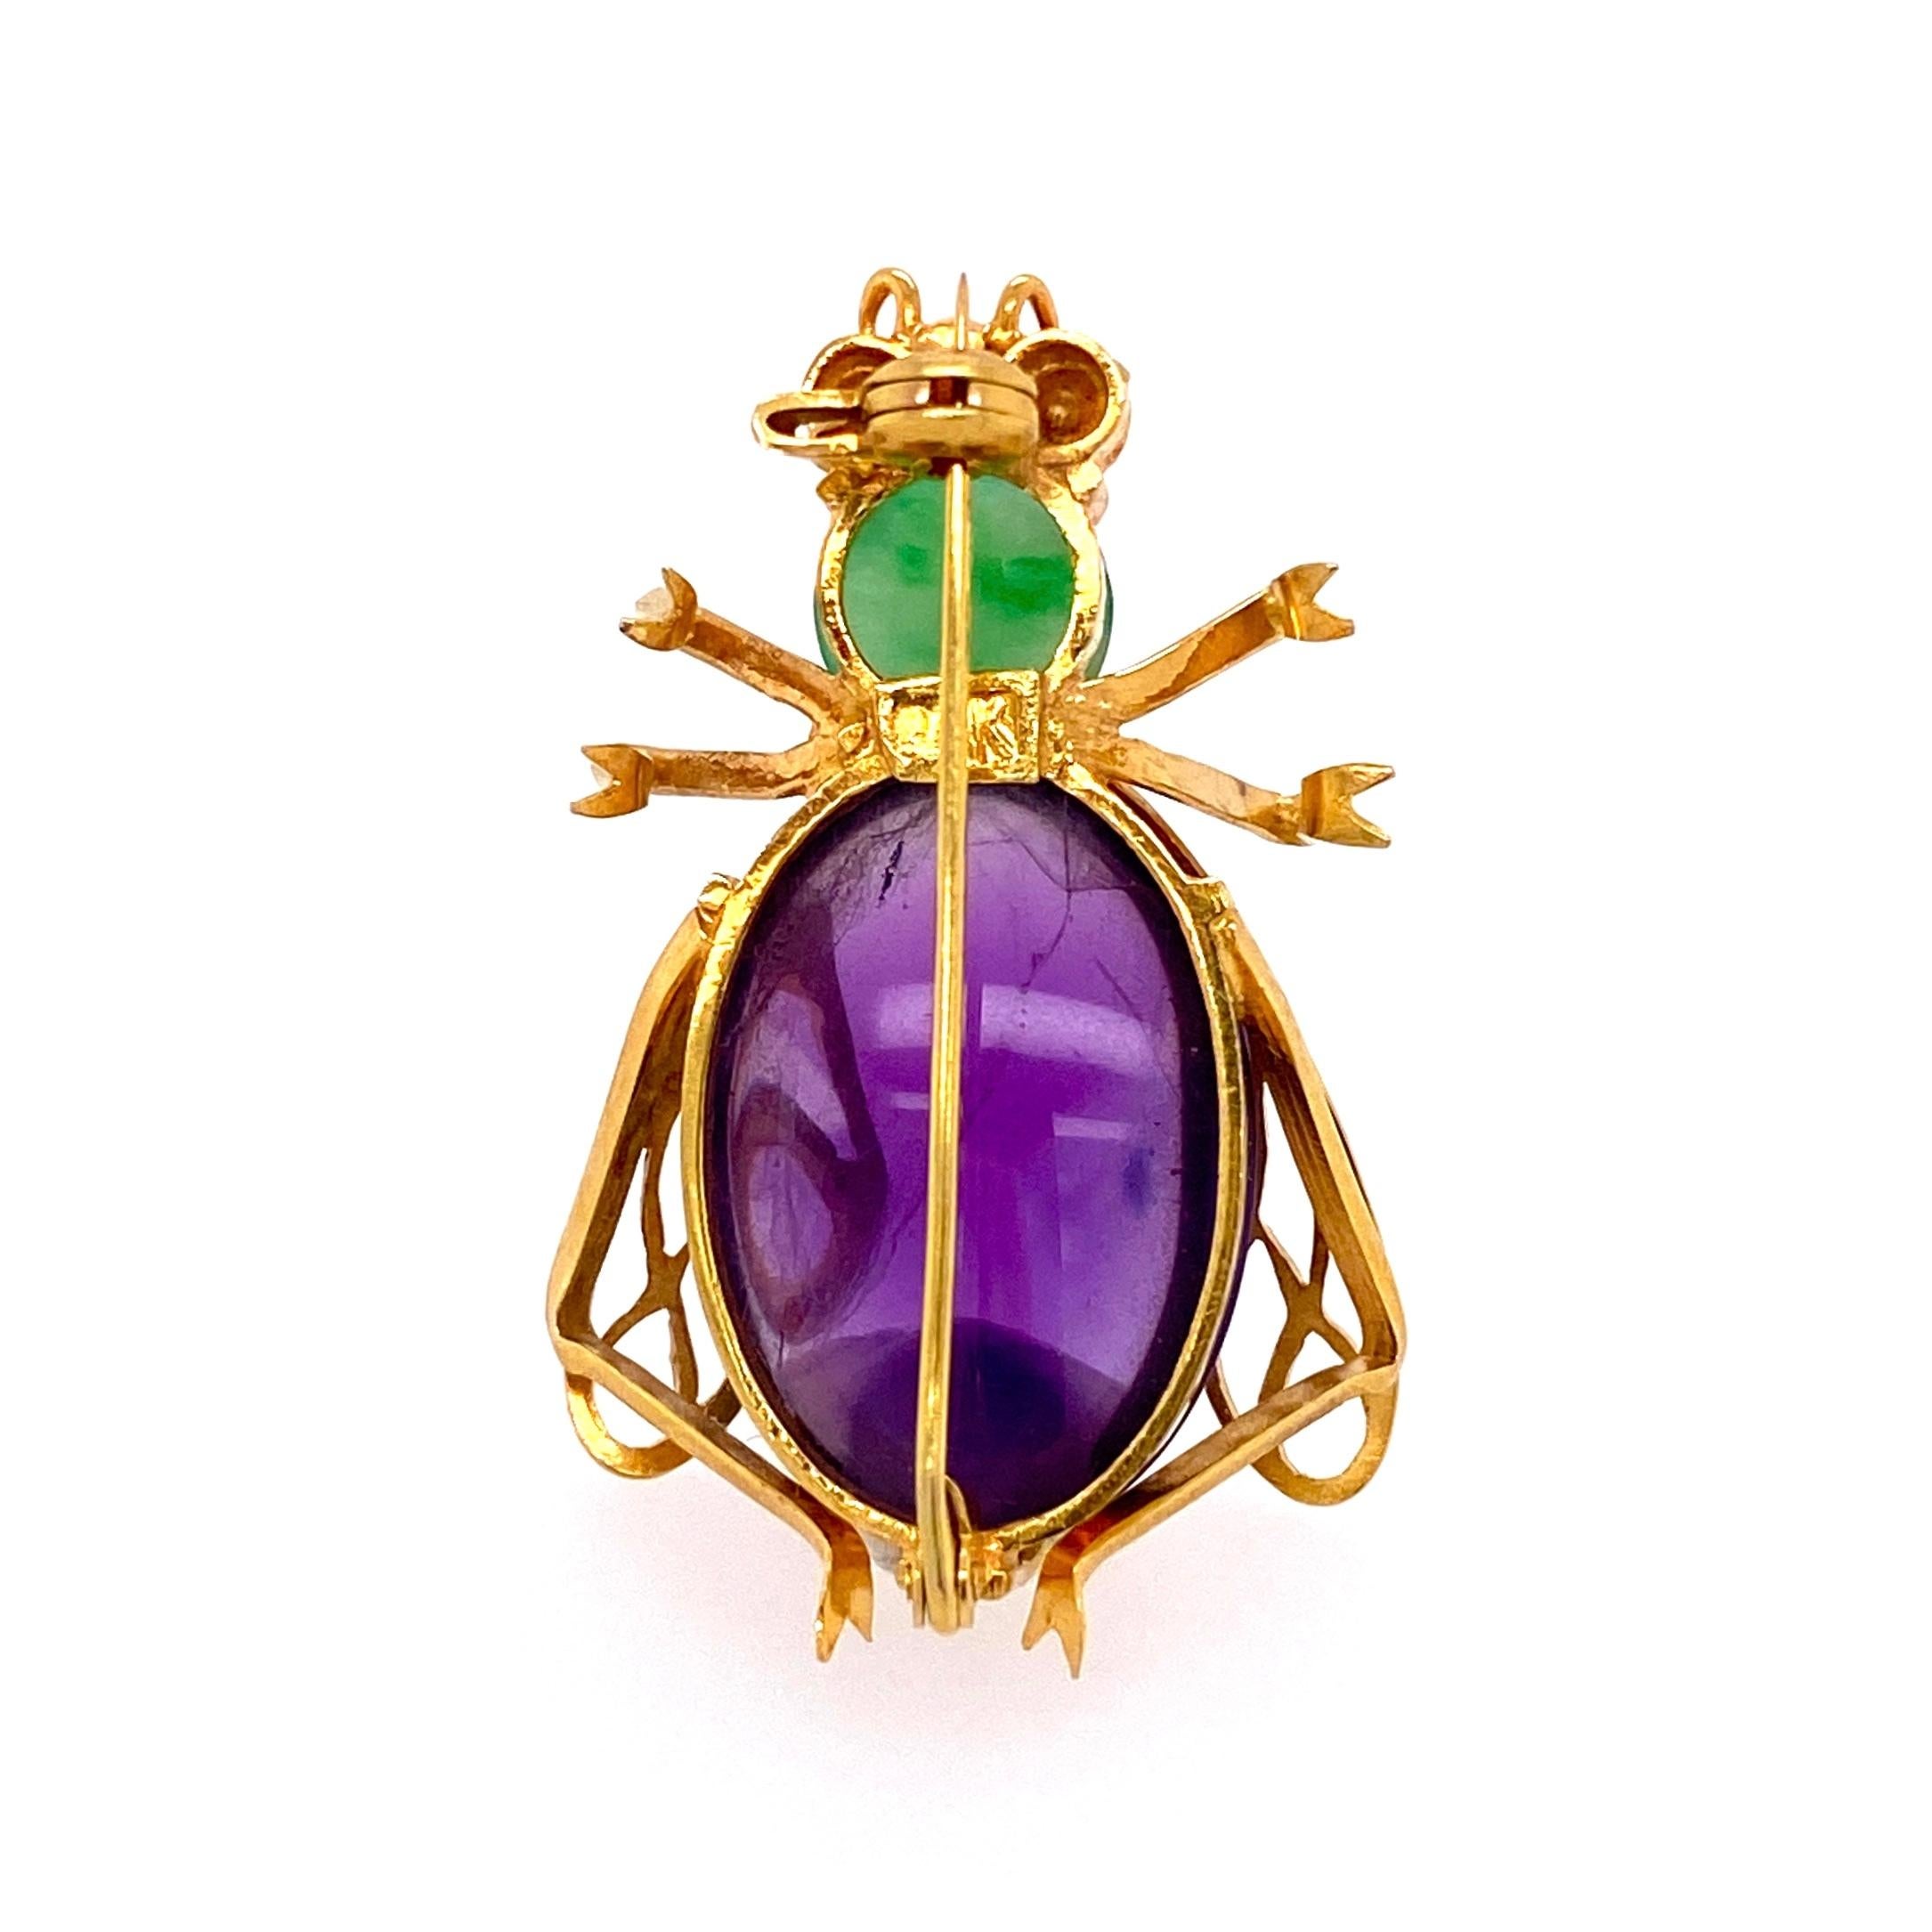 Simply Beautiful, Stylish and finely detailed 12 Carat Amethyst, 0.80 Carat Jade Cool Bug Brooch Pin with Ruby Eyes. Hand crafted in 14 Karat yellow Gold. Circa 1960s. The Pin is in excellent vintage condition and recently professionally cleaned and